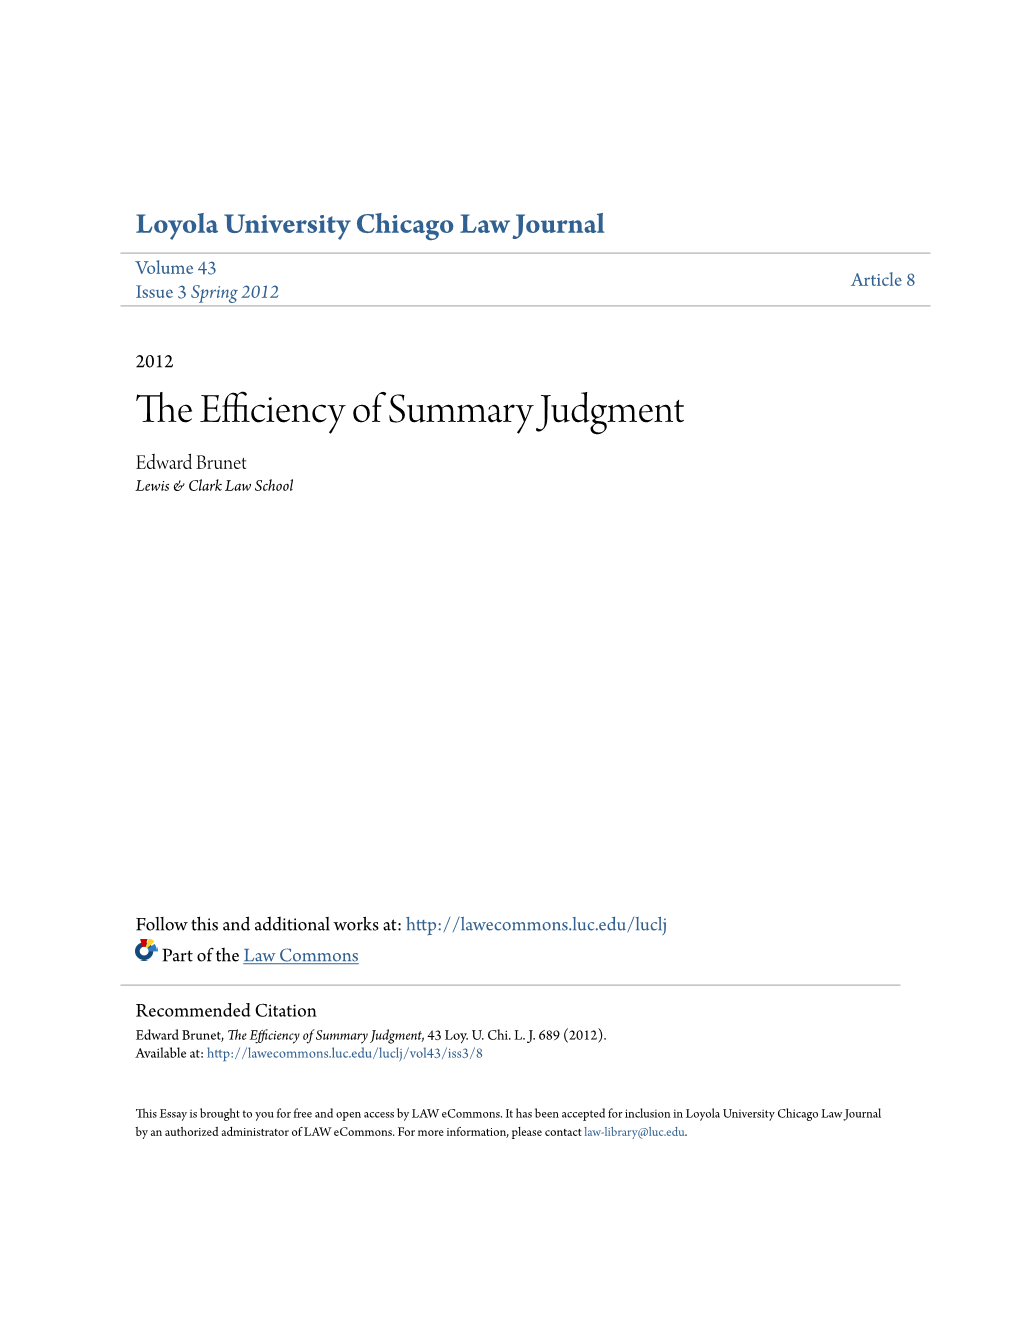 The Efficiency of Summary Judgment, 43 Loy